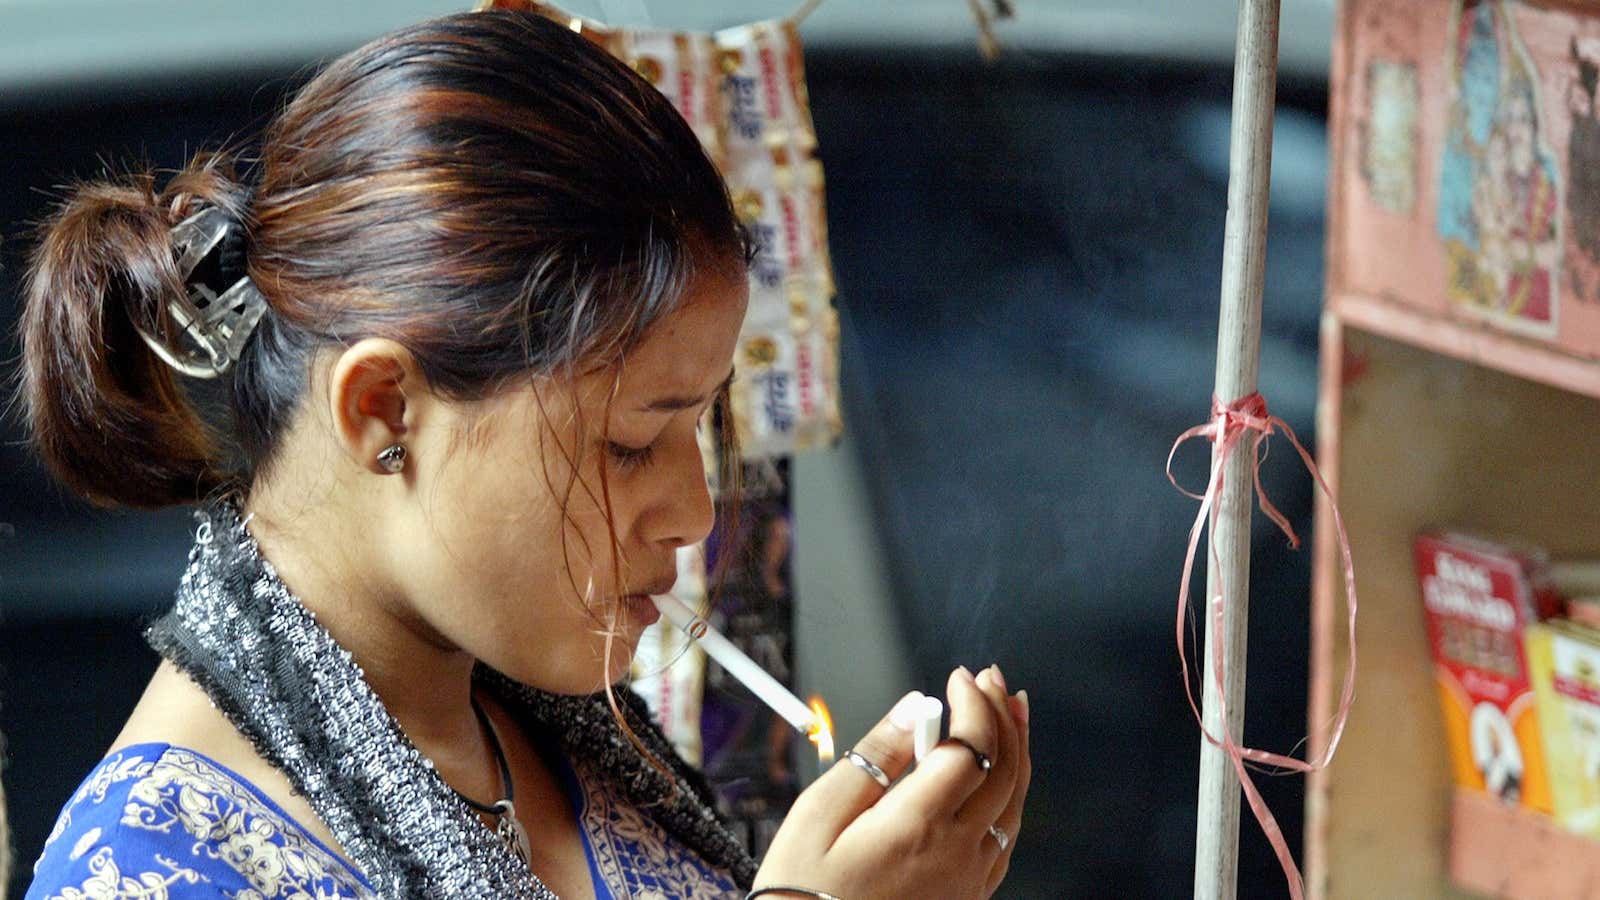 About 70% of the cigarettes sold in India are loose.